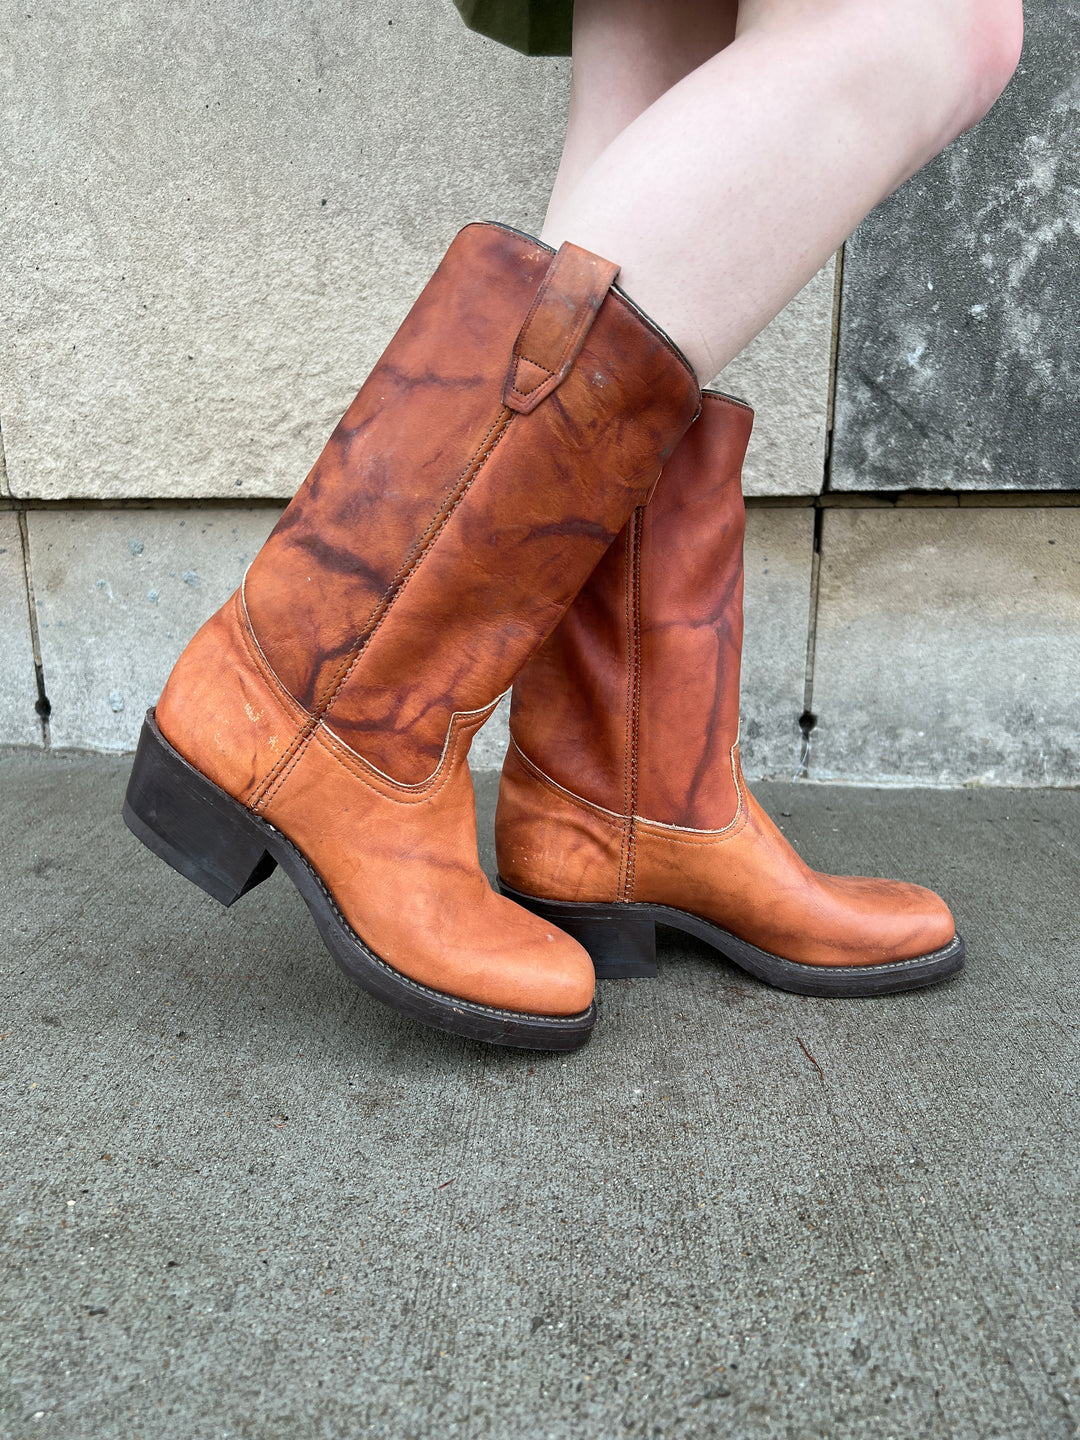 70s Brown Square Toe Boots, Campus, New Old Stock